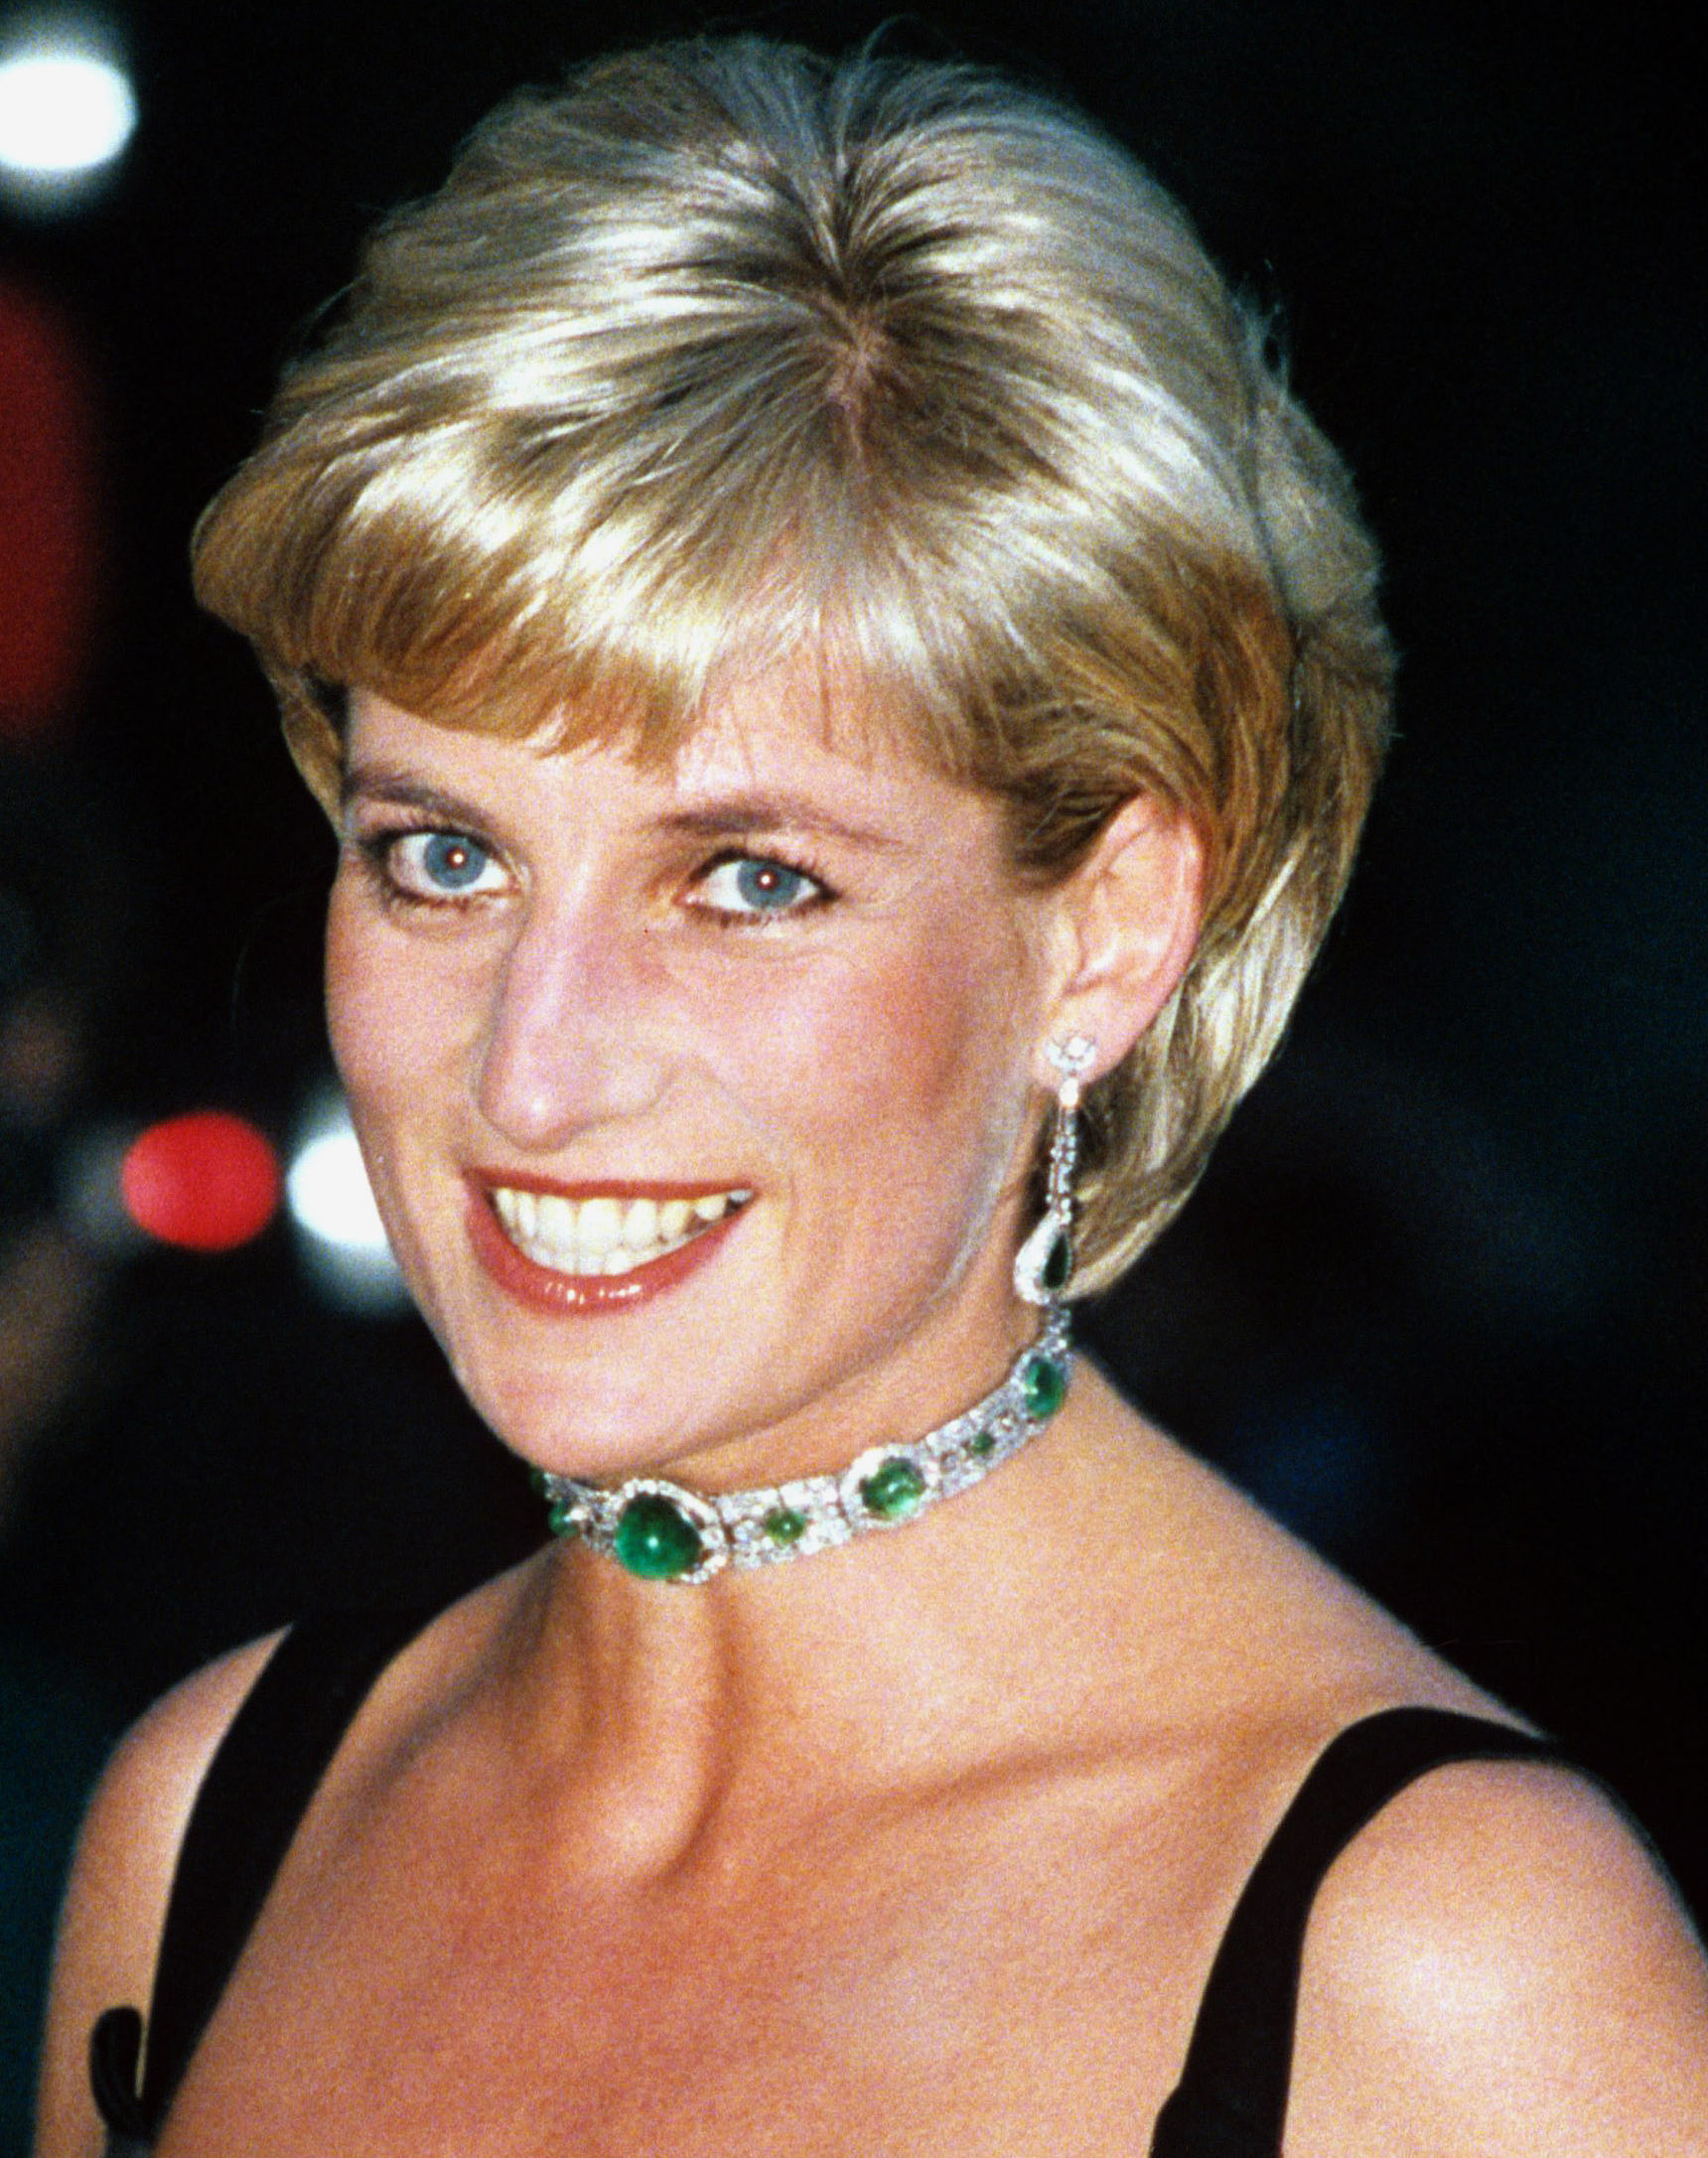 The Crown' Slammed for Making Iconic Princess Diana Necklace Look 'Cheap'